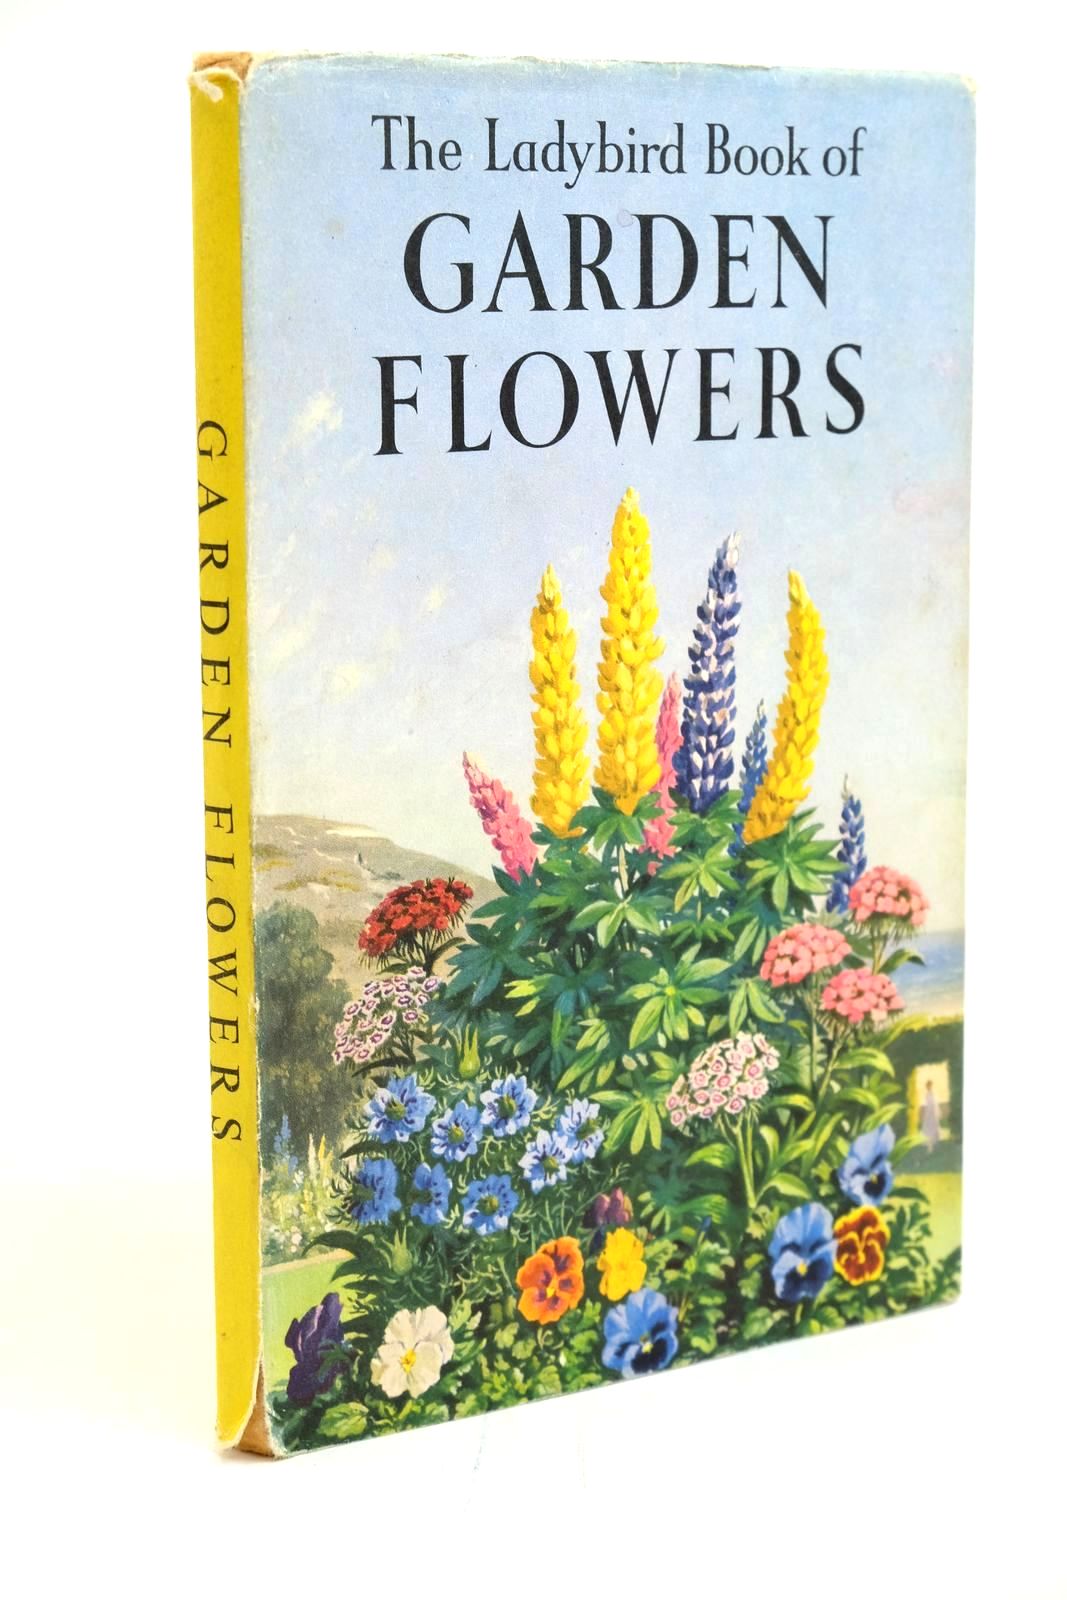 Photo of THE LADYBIRD BOOK OF GARDEN FLOWERS written by Vesey-Fitzgerald, Brian illustrated by Leigh-Pemberton, John published by Wills &amp; Hepworth Ltd. (STOCK CODE: 1321426)  for sale by Stella & Rose's Books